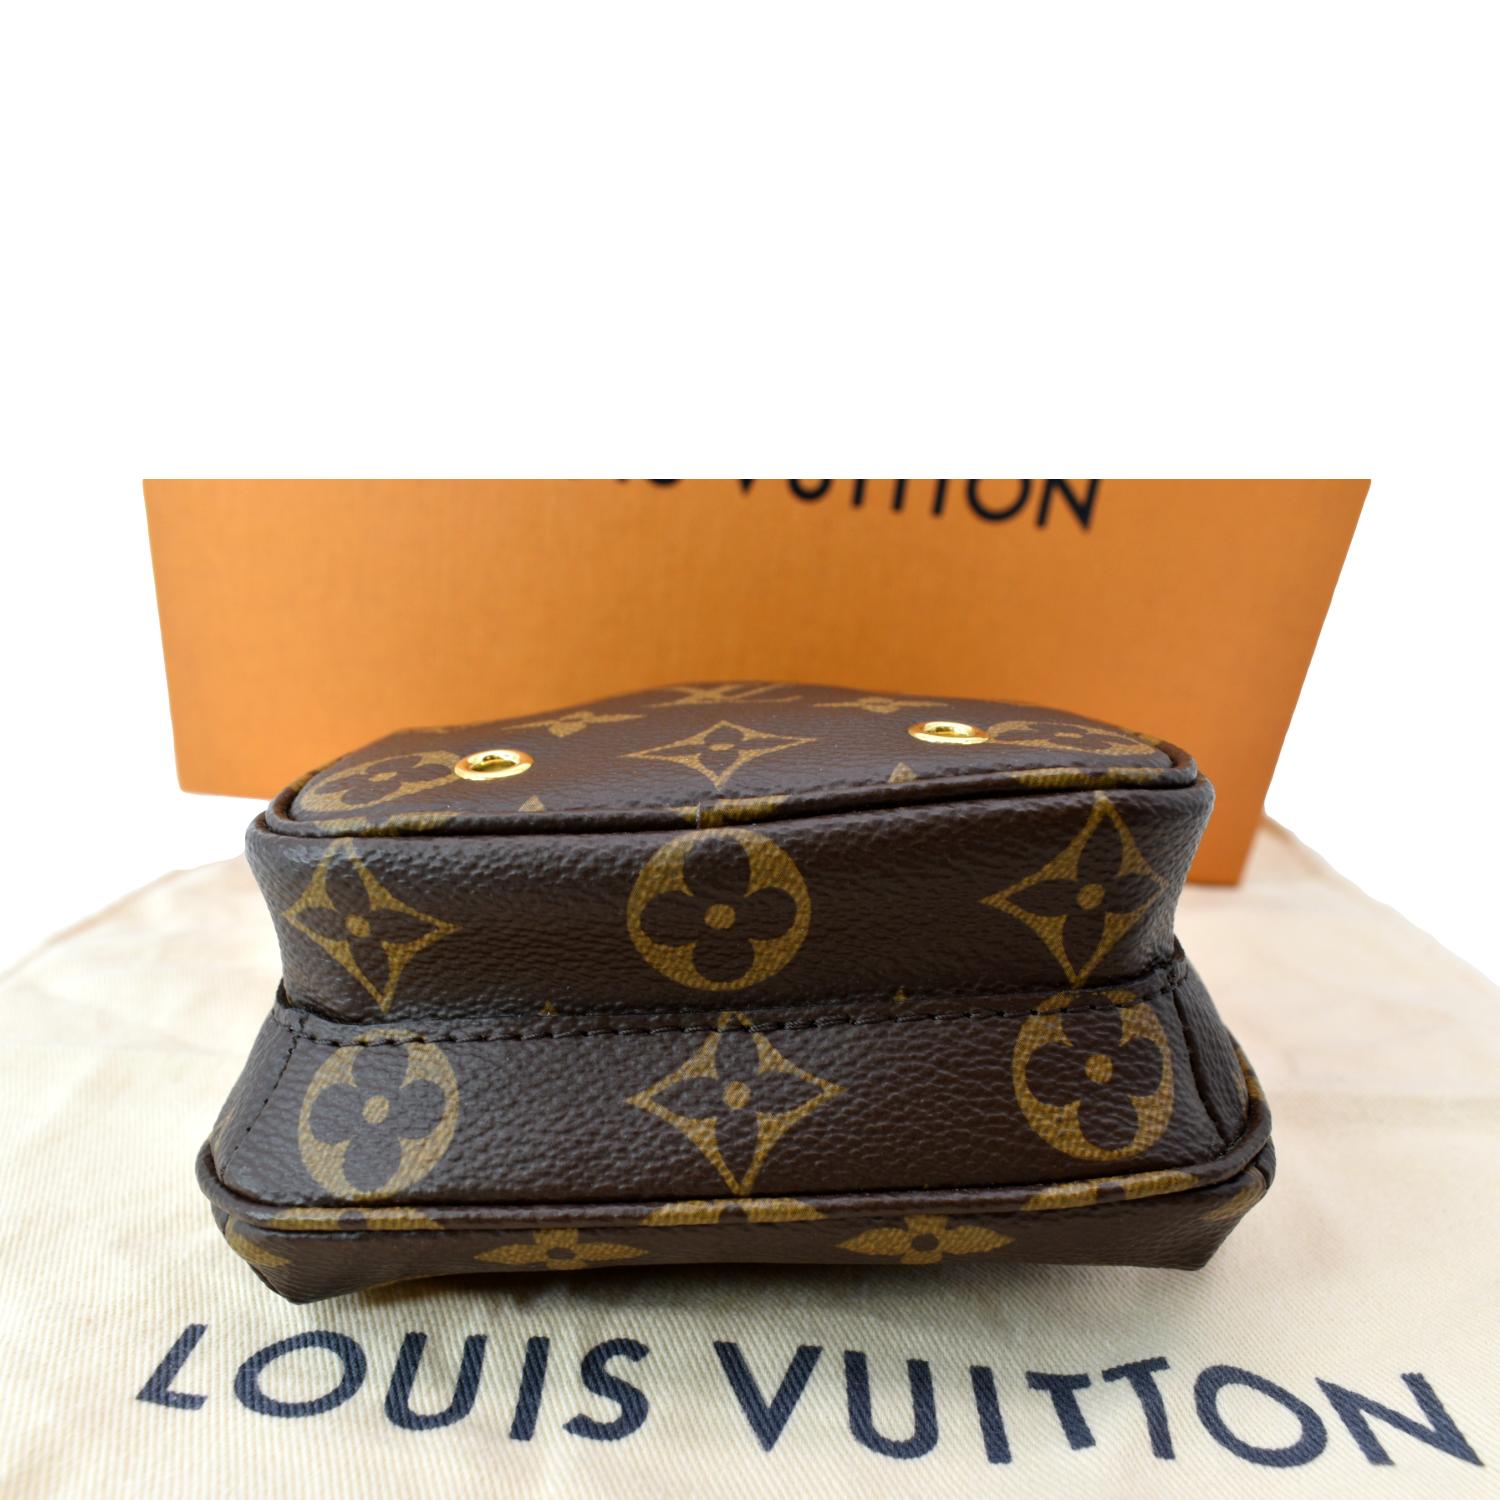 Osh ®⚡︎✨ on Instagram: This Louis Vuitton Plane Bag Costs More